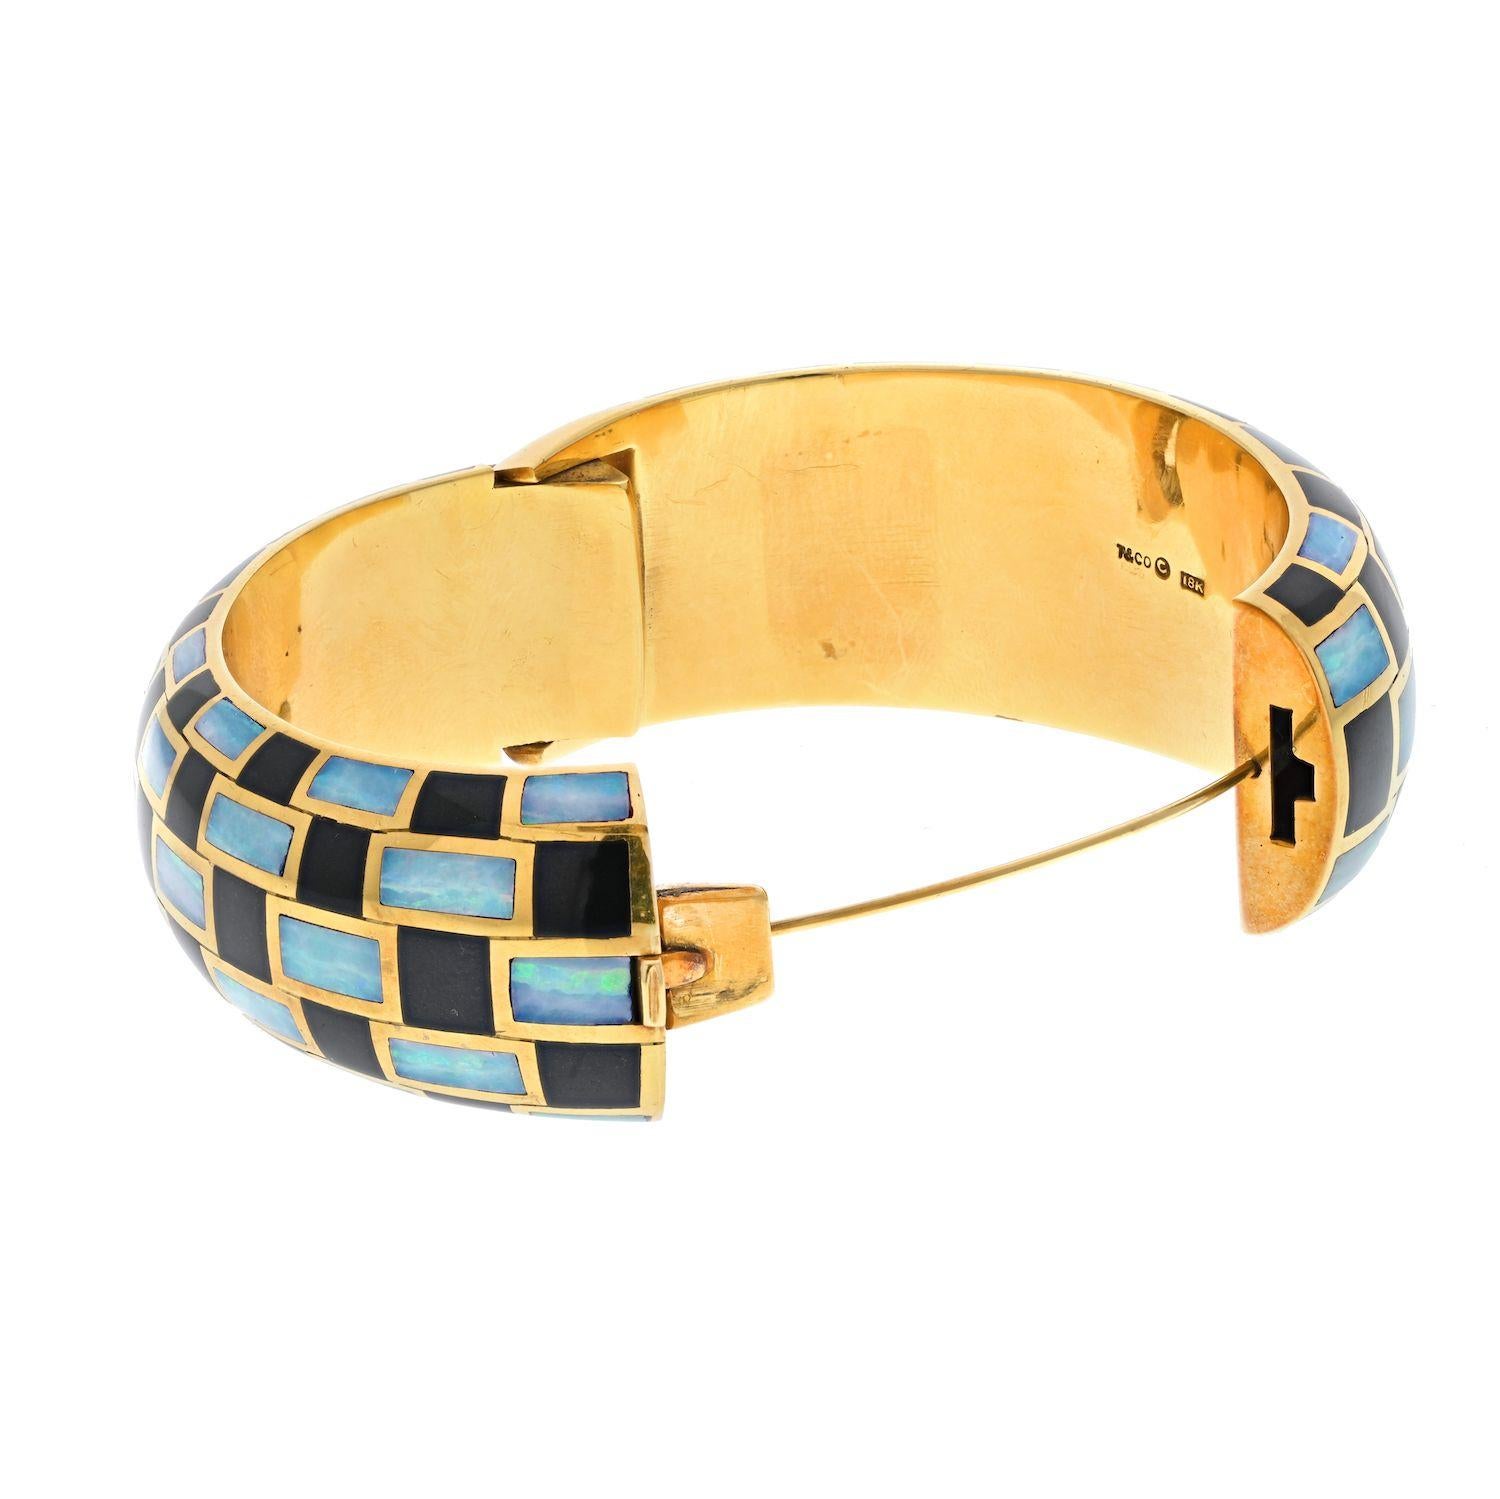 A vintage Angela Cummings for Tiffany & Co. black enamel and opal inlay 18K yellow gold hinged bangle bracelet. Circa 1970.
Wrist size 6 inches (inner circumference 6 inches). 
Width: 0.75 inches. 